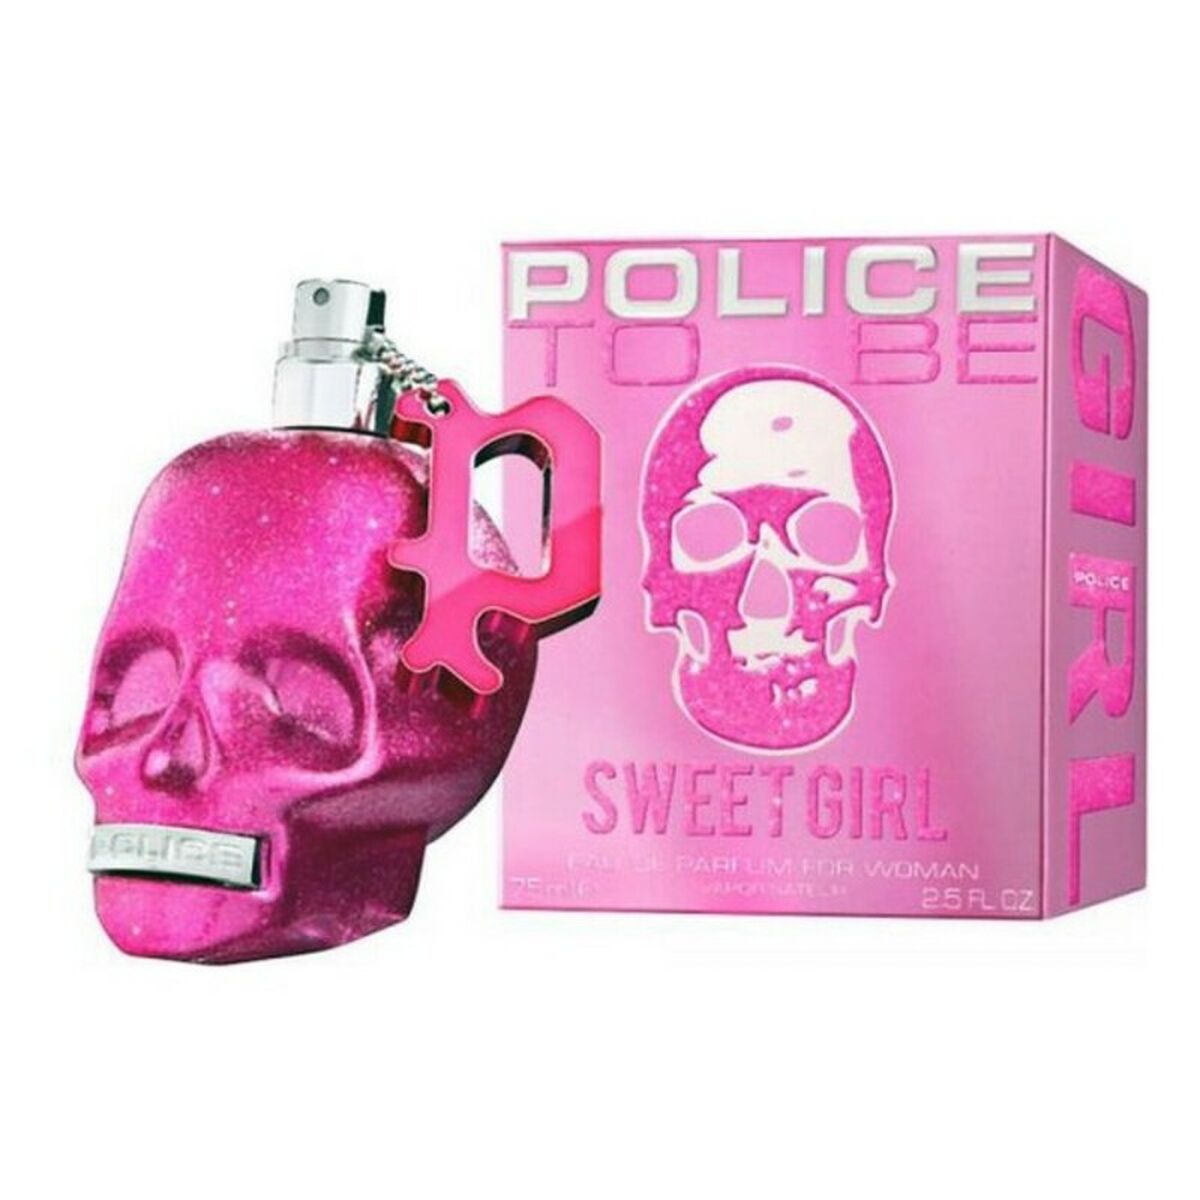 Profumo Donna To Be Sweet Girl Police